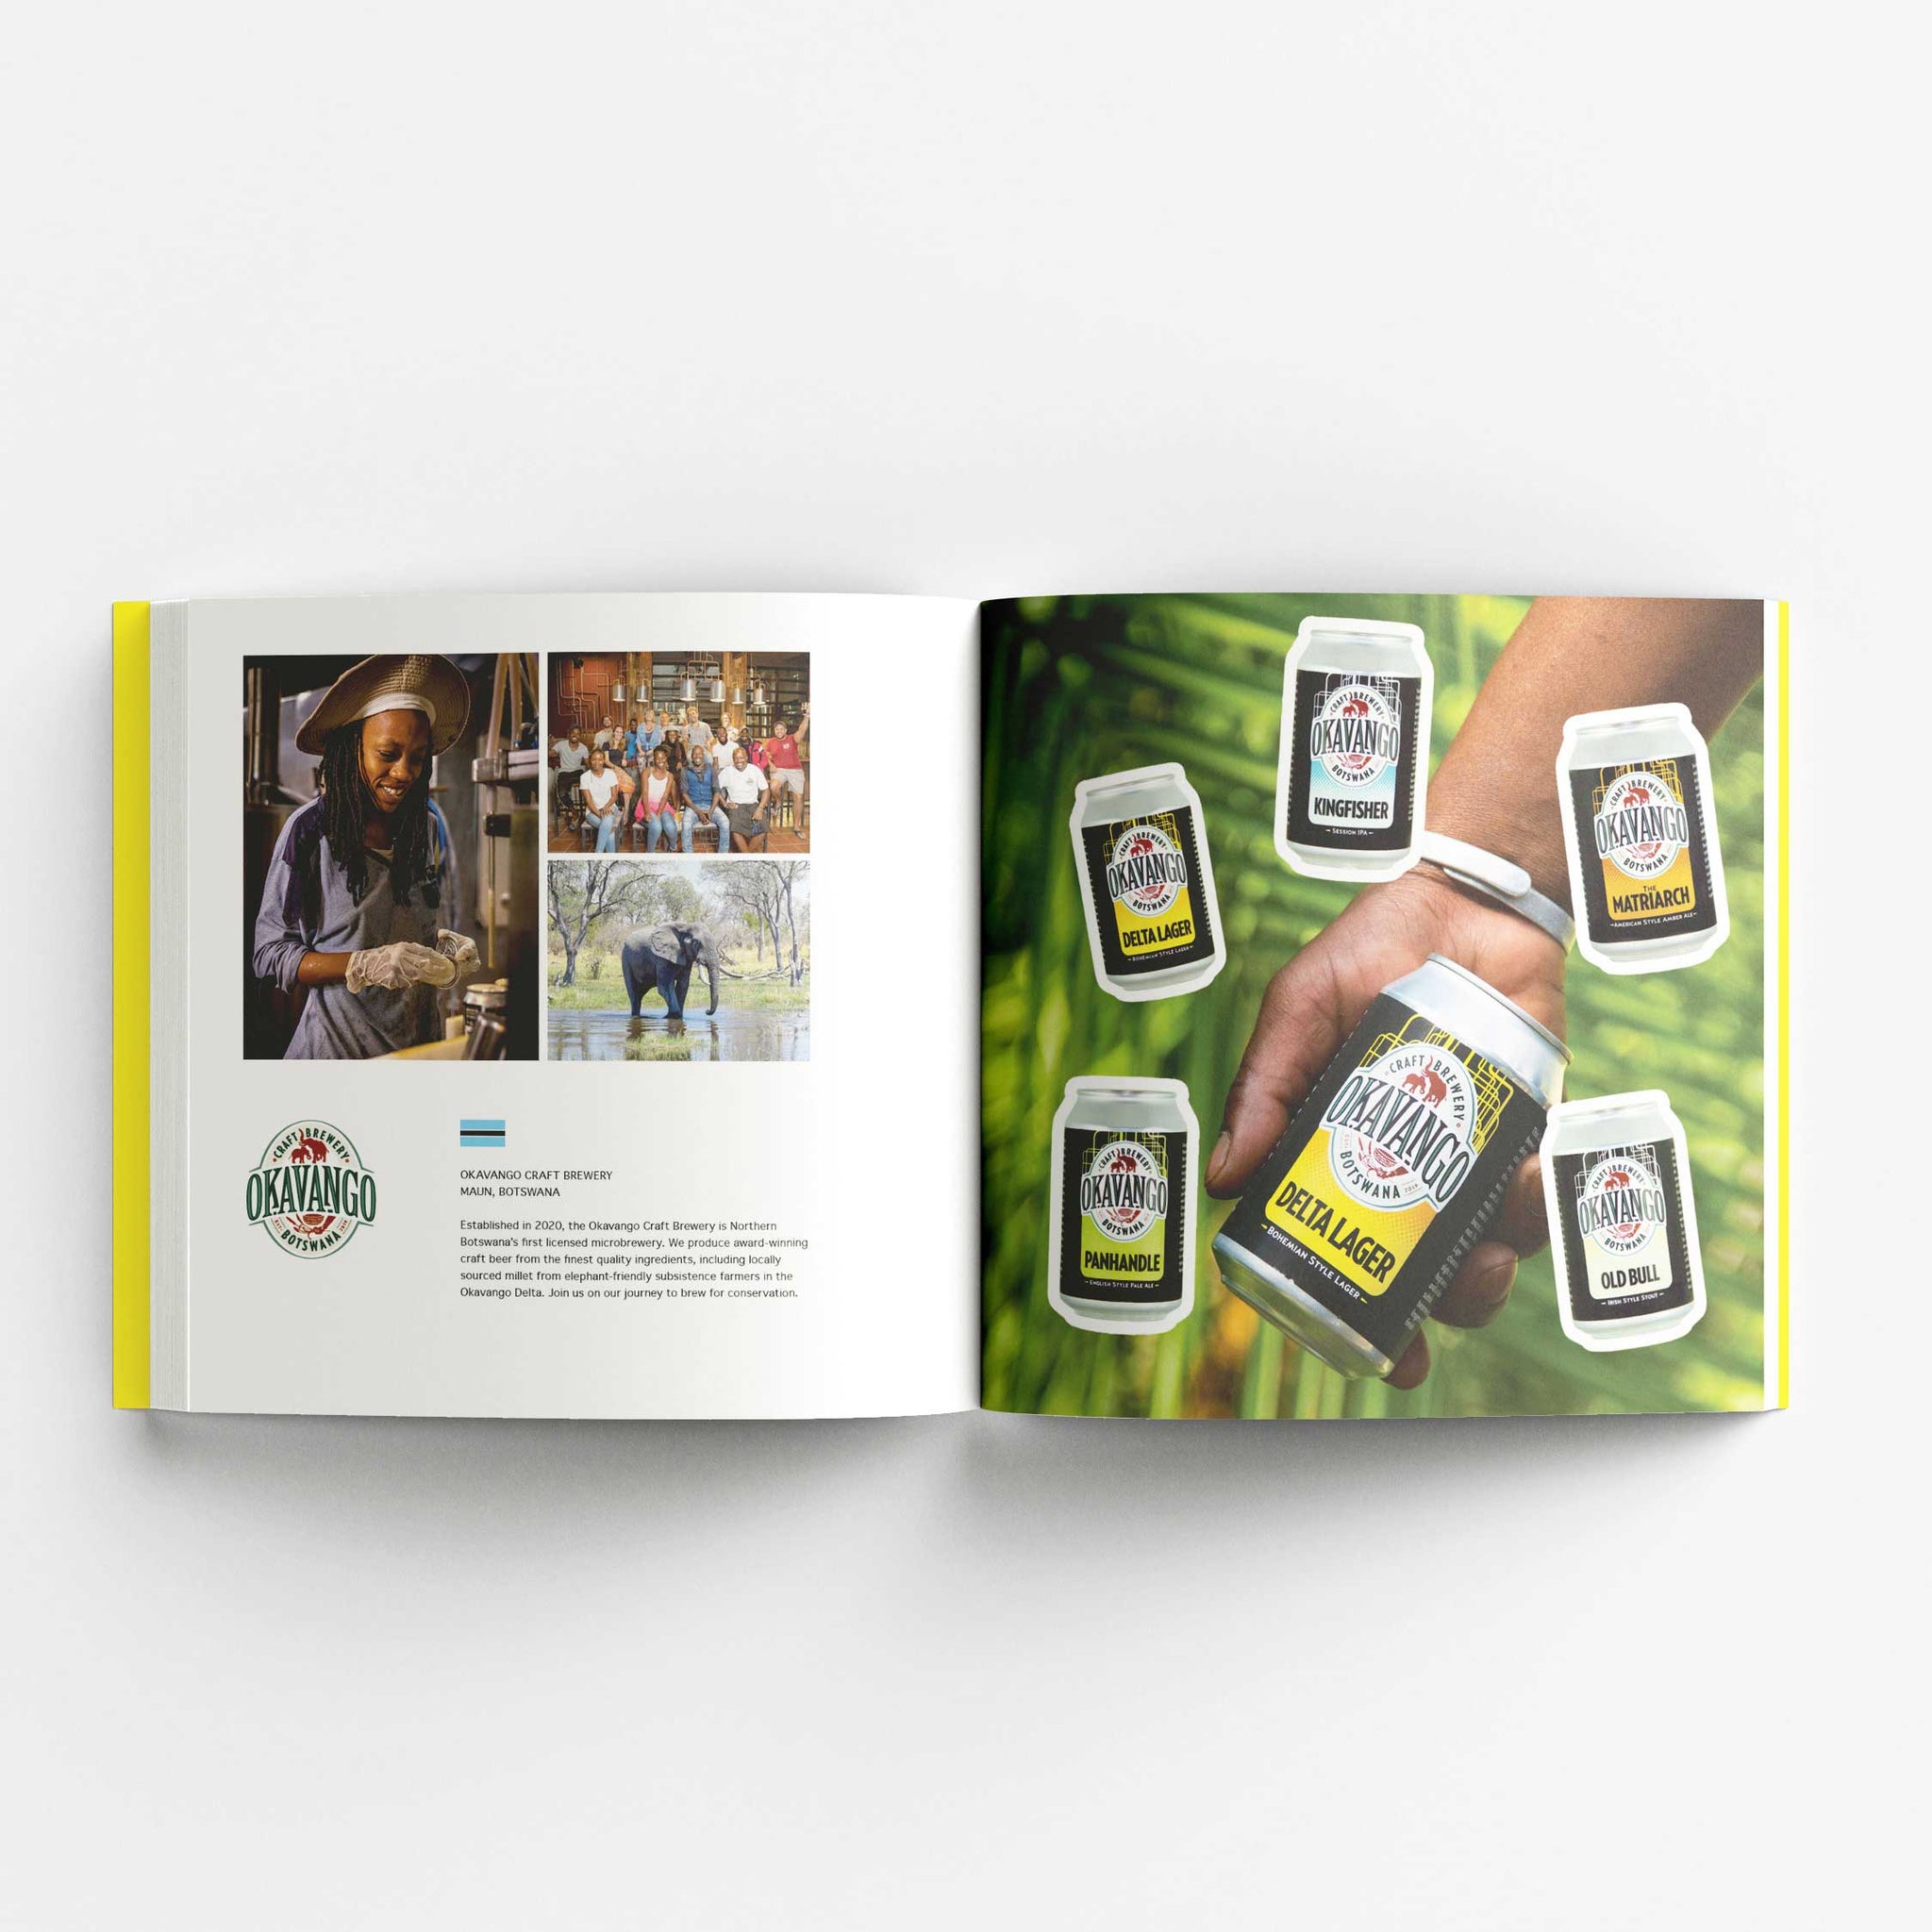 The Craft Beer Sticker Book. 300 Peelable Stickers From Craft Breweries Around The World